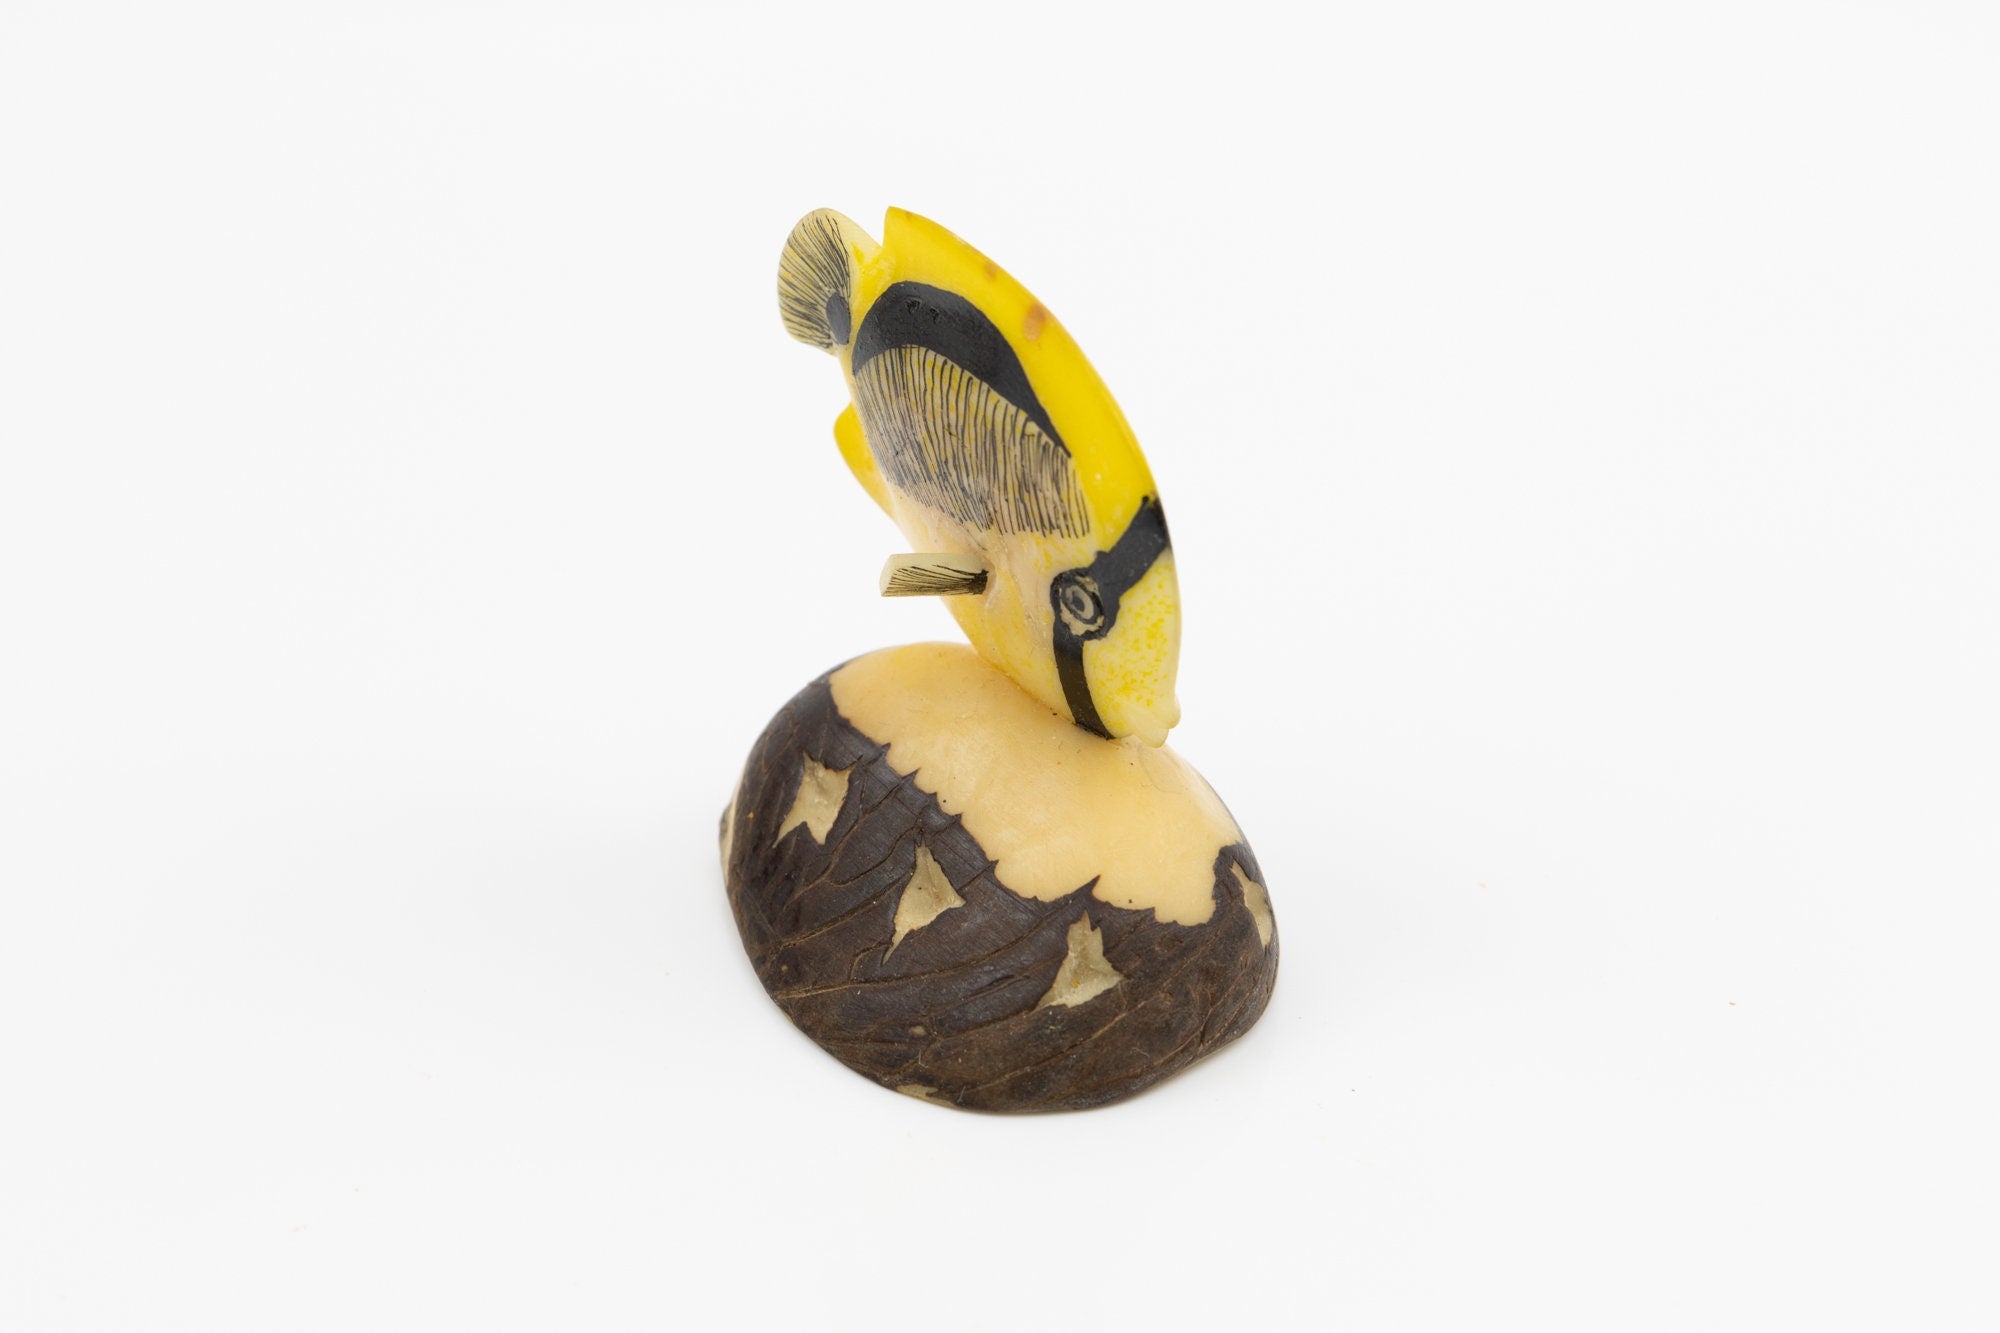 Hand Carved Tropical Fish Tagua Nut Made By Wounaan And Emberá Panama Indians. Animal Statue, Vegetable Ivory, Carving Miniature, Figurine